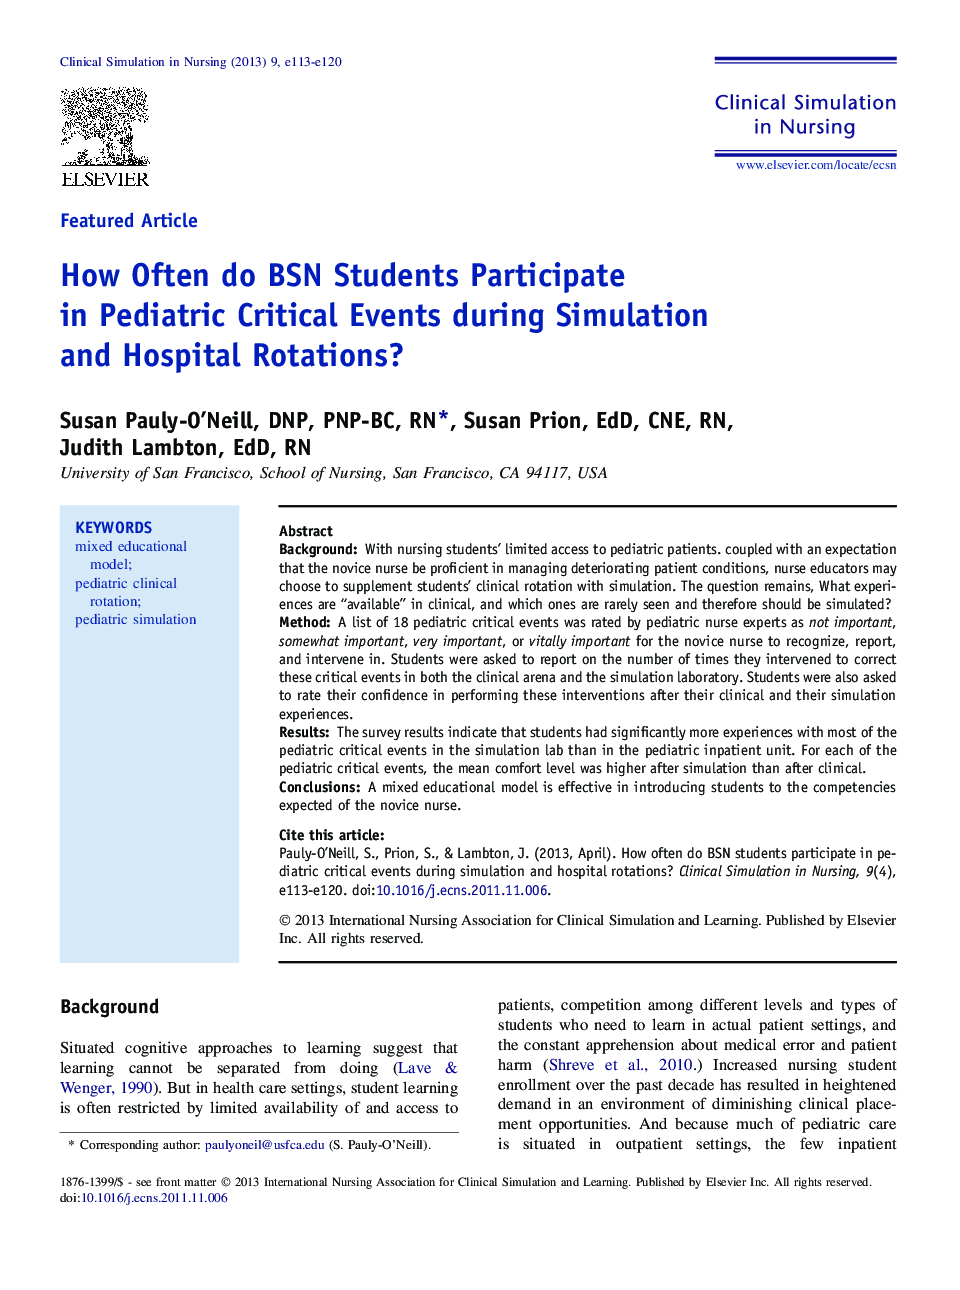 How Often do BSN Students Participate in Pediatric Critical Events during Simulation and Hospital Rotations?